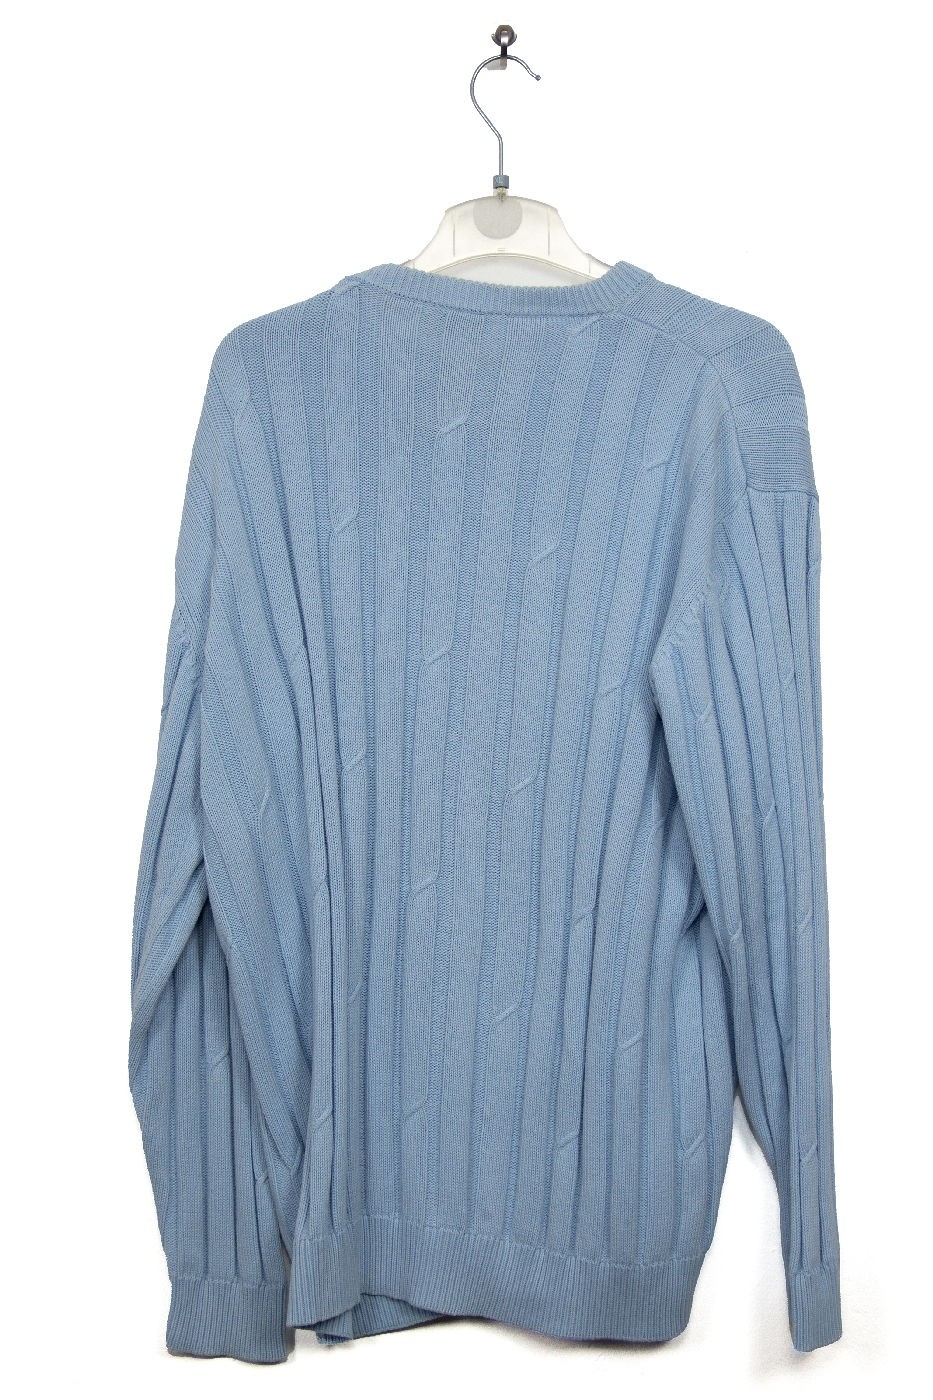 Pull Conte of Florence, taille XL 25,20 €